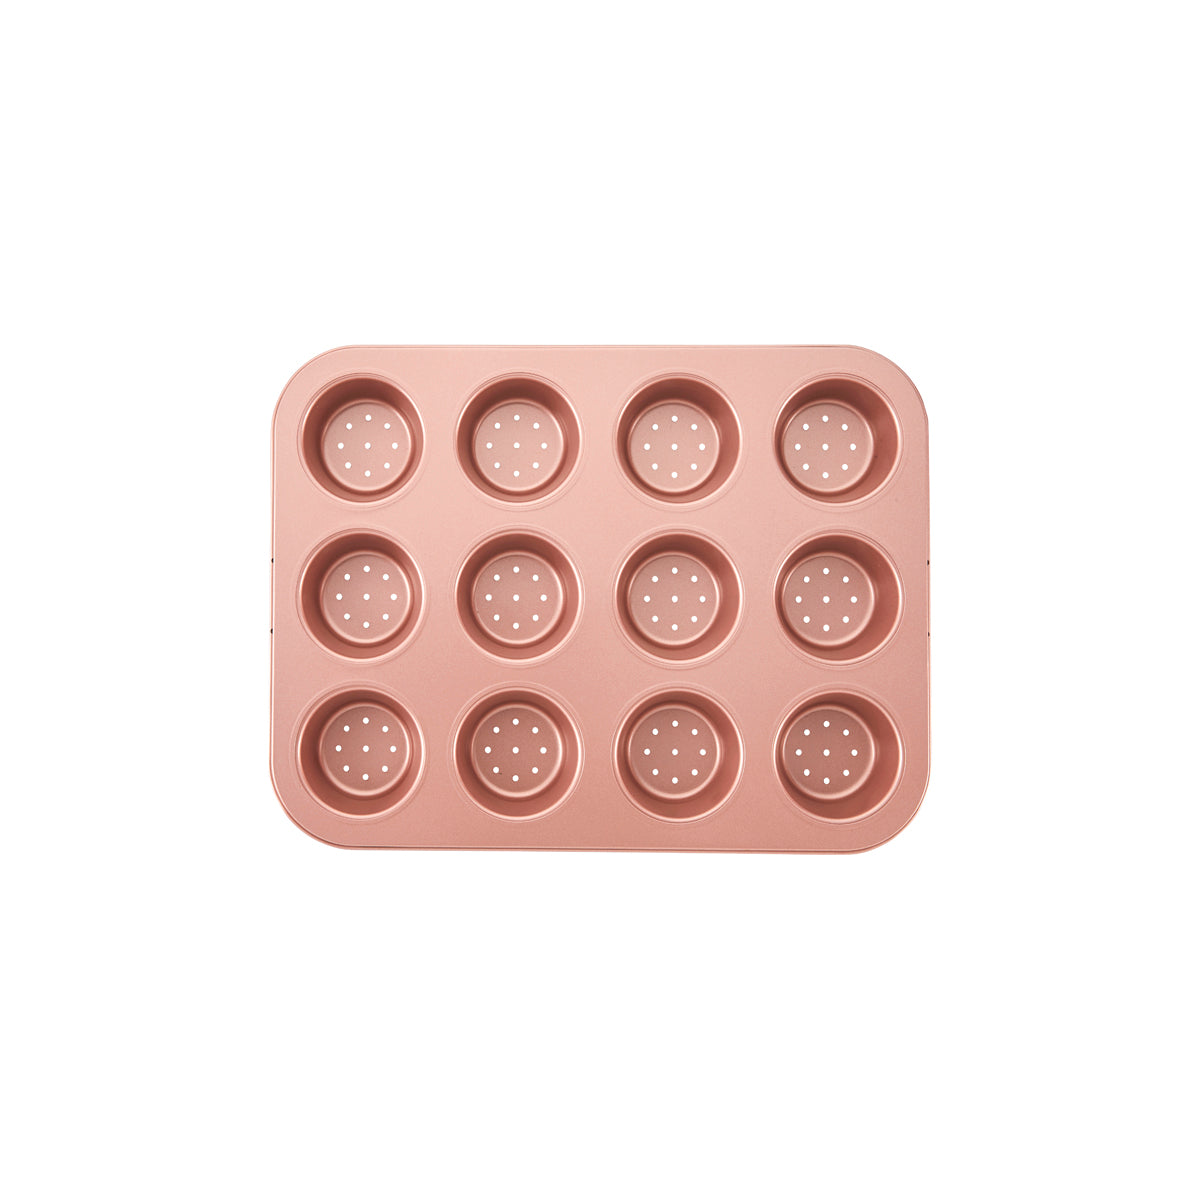 WLT40718 Wiltshire Rose Gold Perforated Mini Quiche / Tart Pan 12 Cup Tomkin Australia Hospitality Supplies